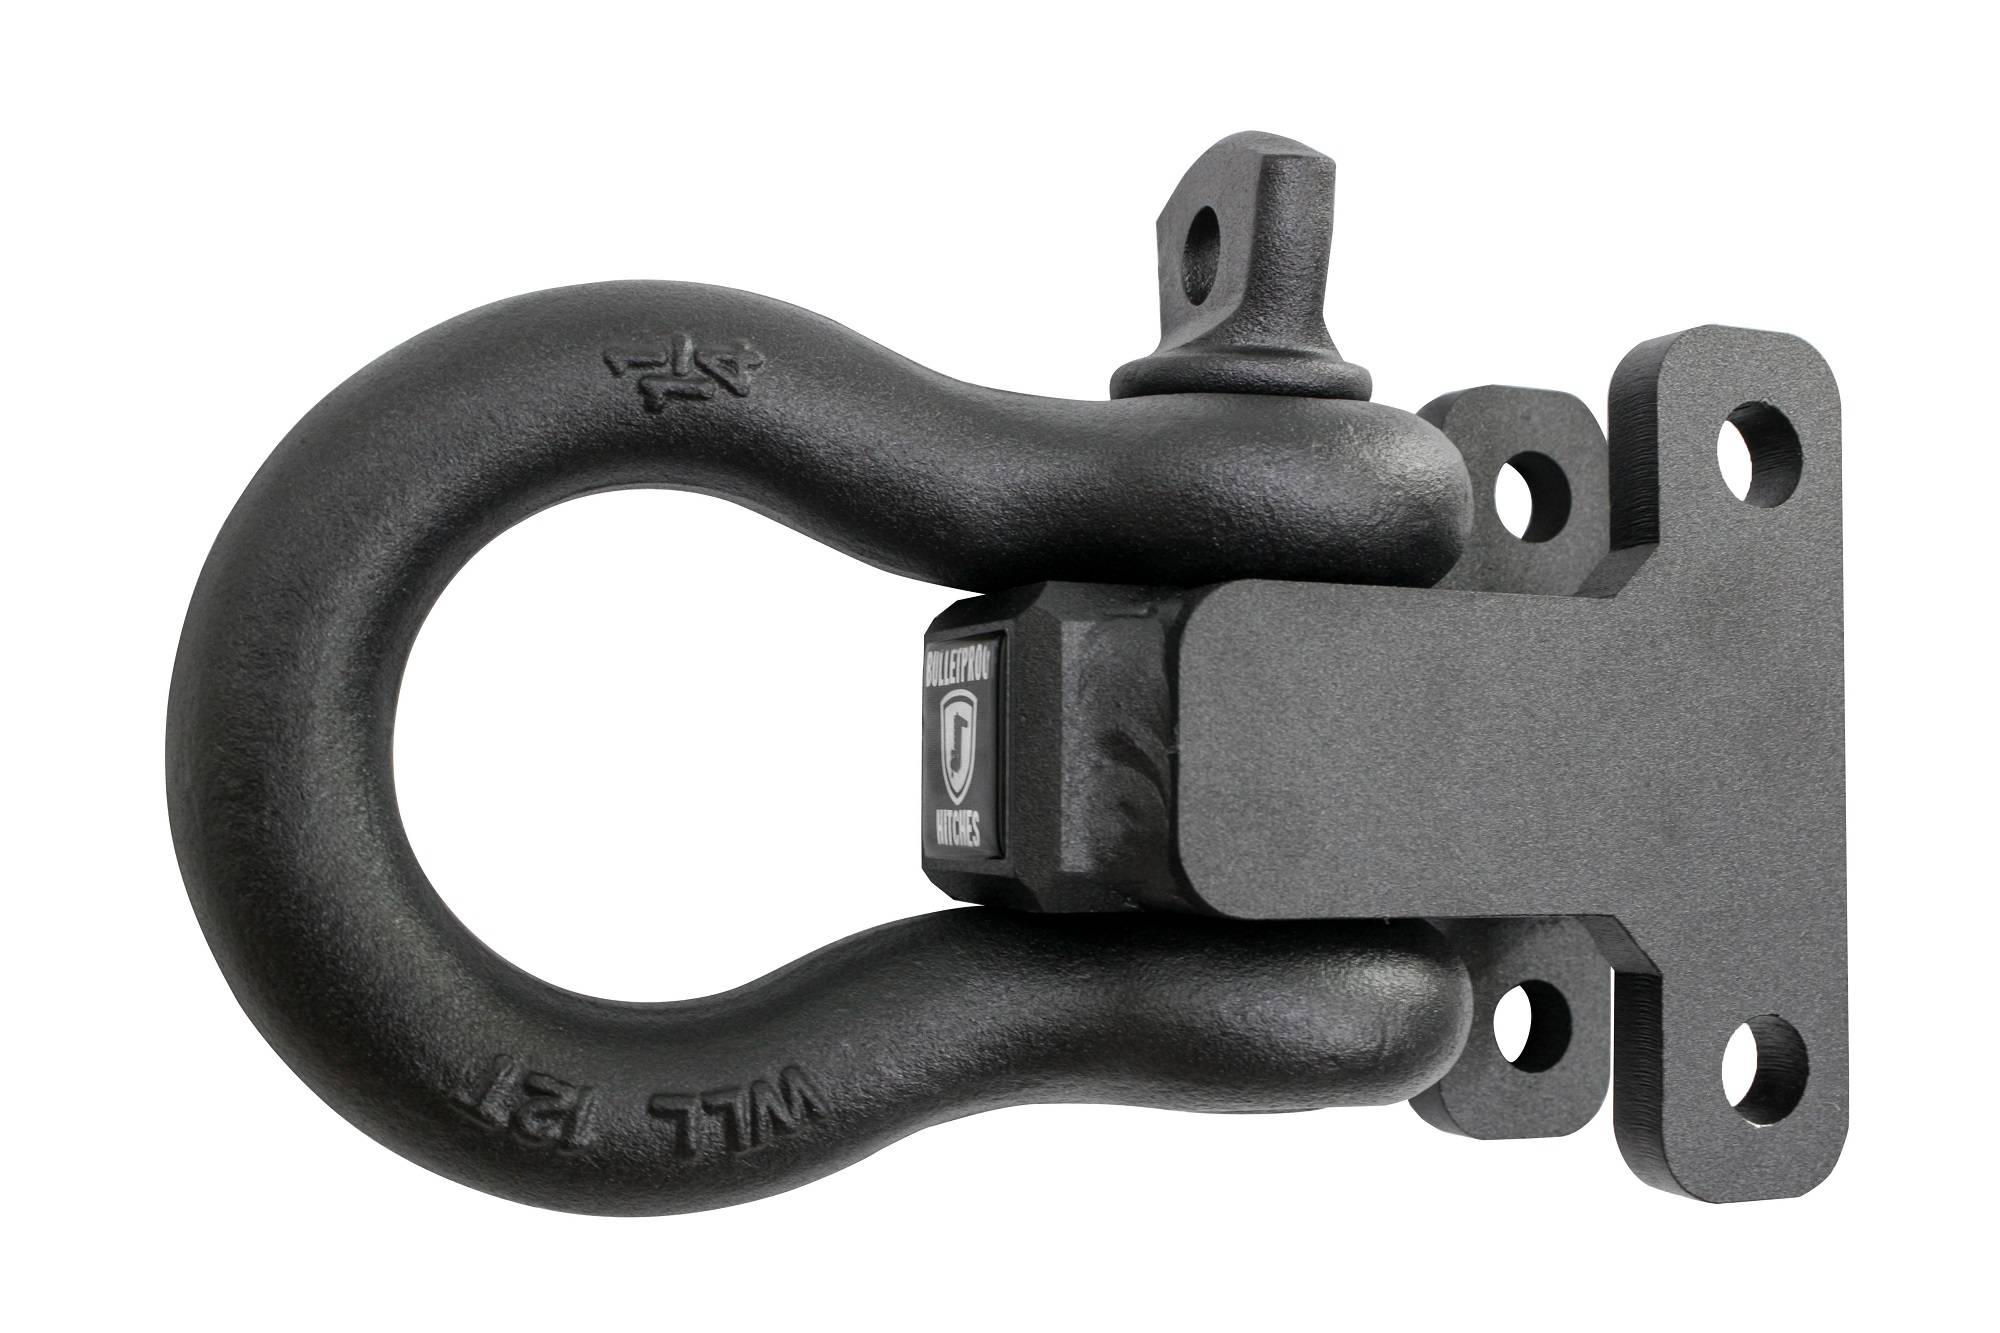 BulletProof Extreme Duty Shackle Attachment